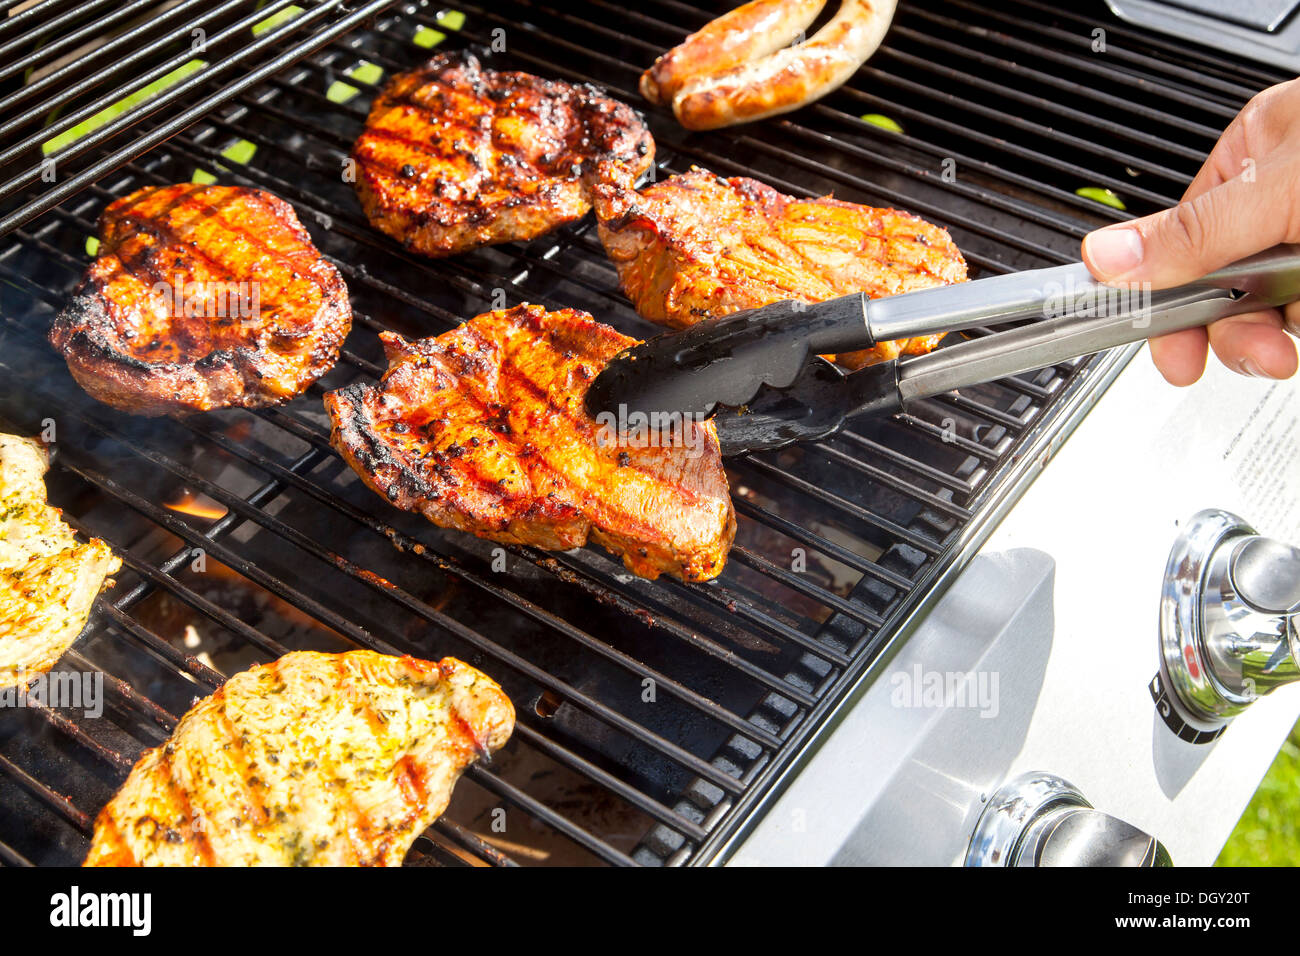 Pork steaks on a gas grill, Germany Stock Photo